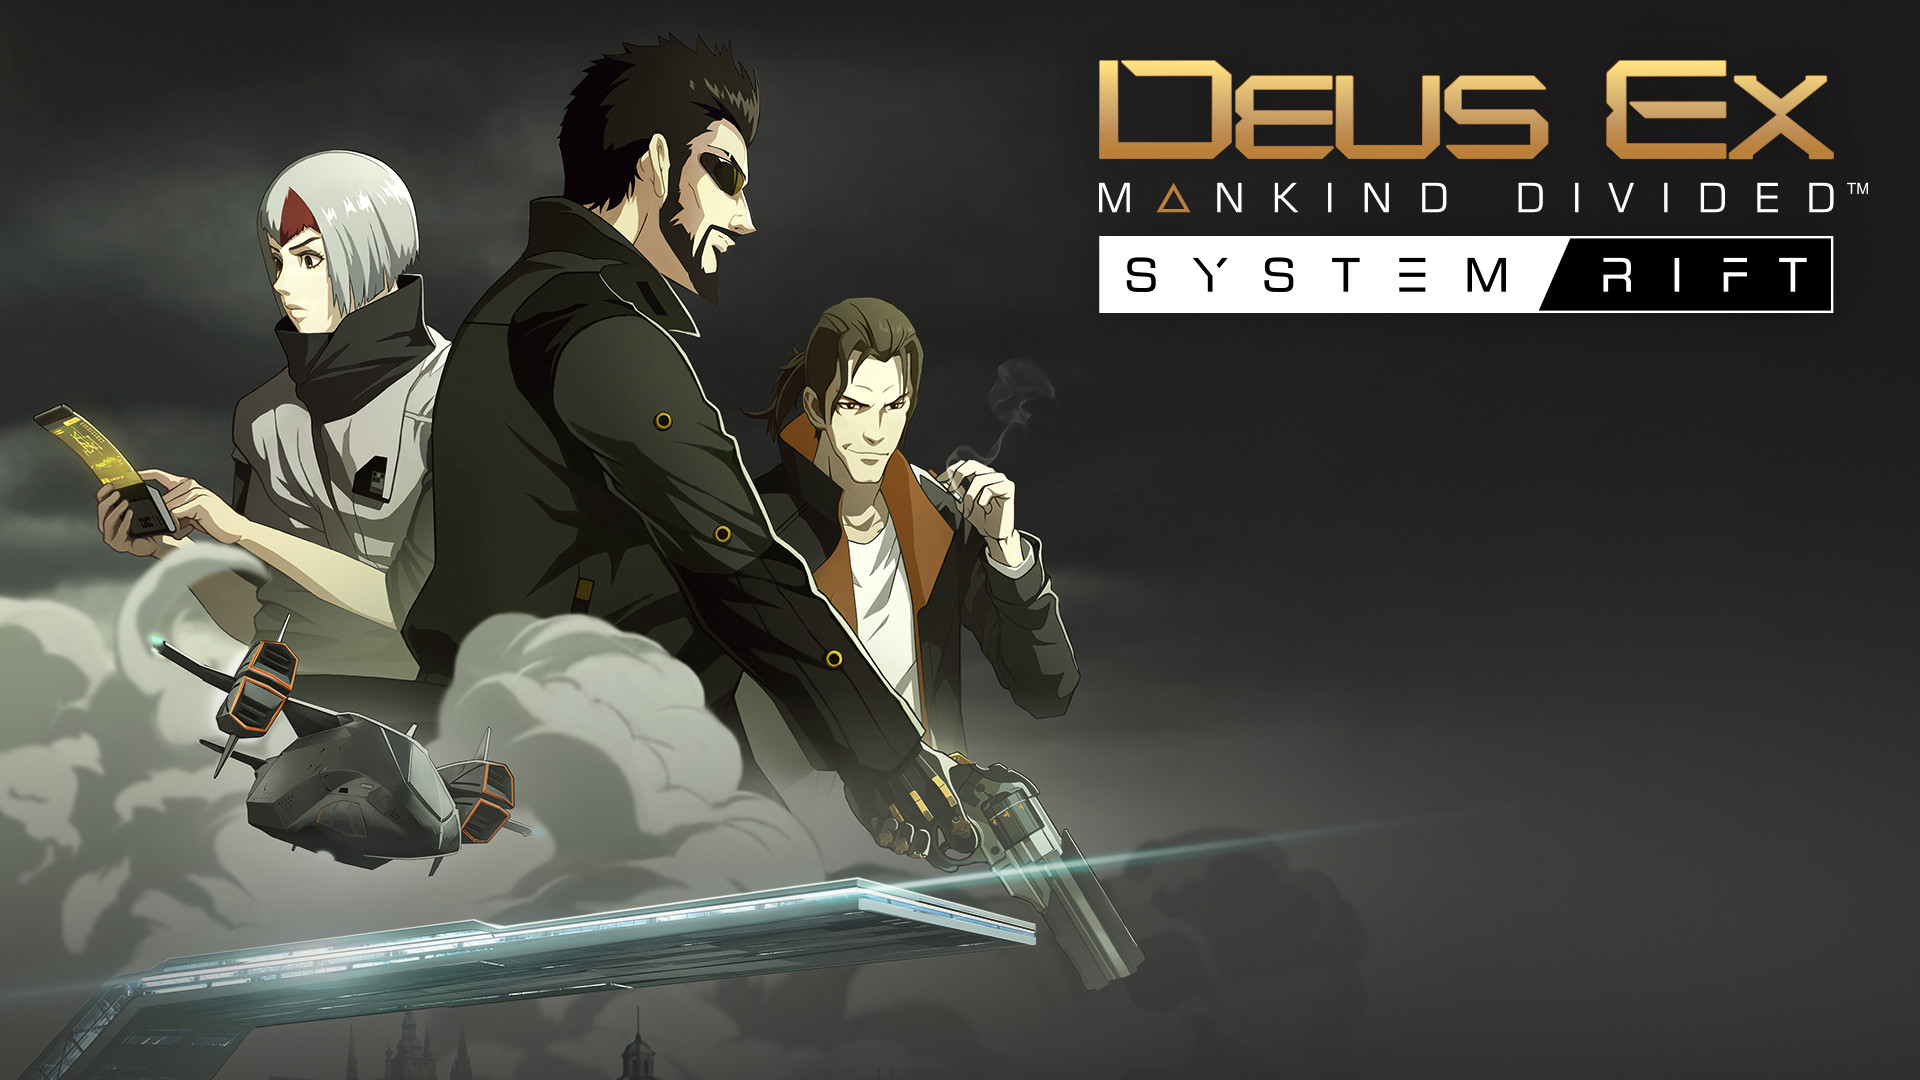 Mankind Divided Release